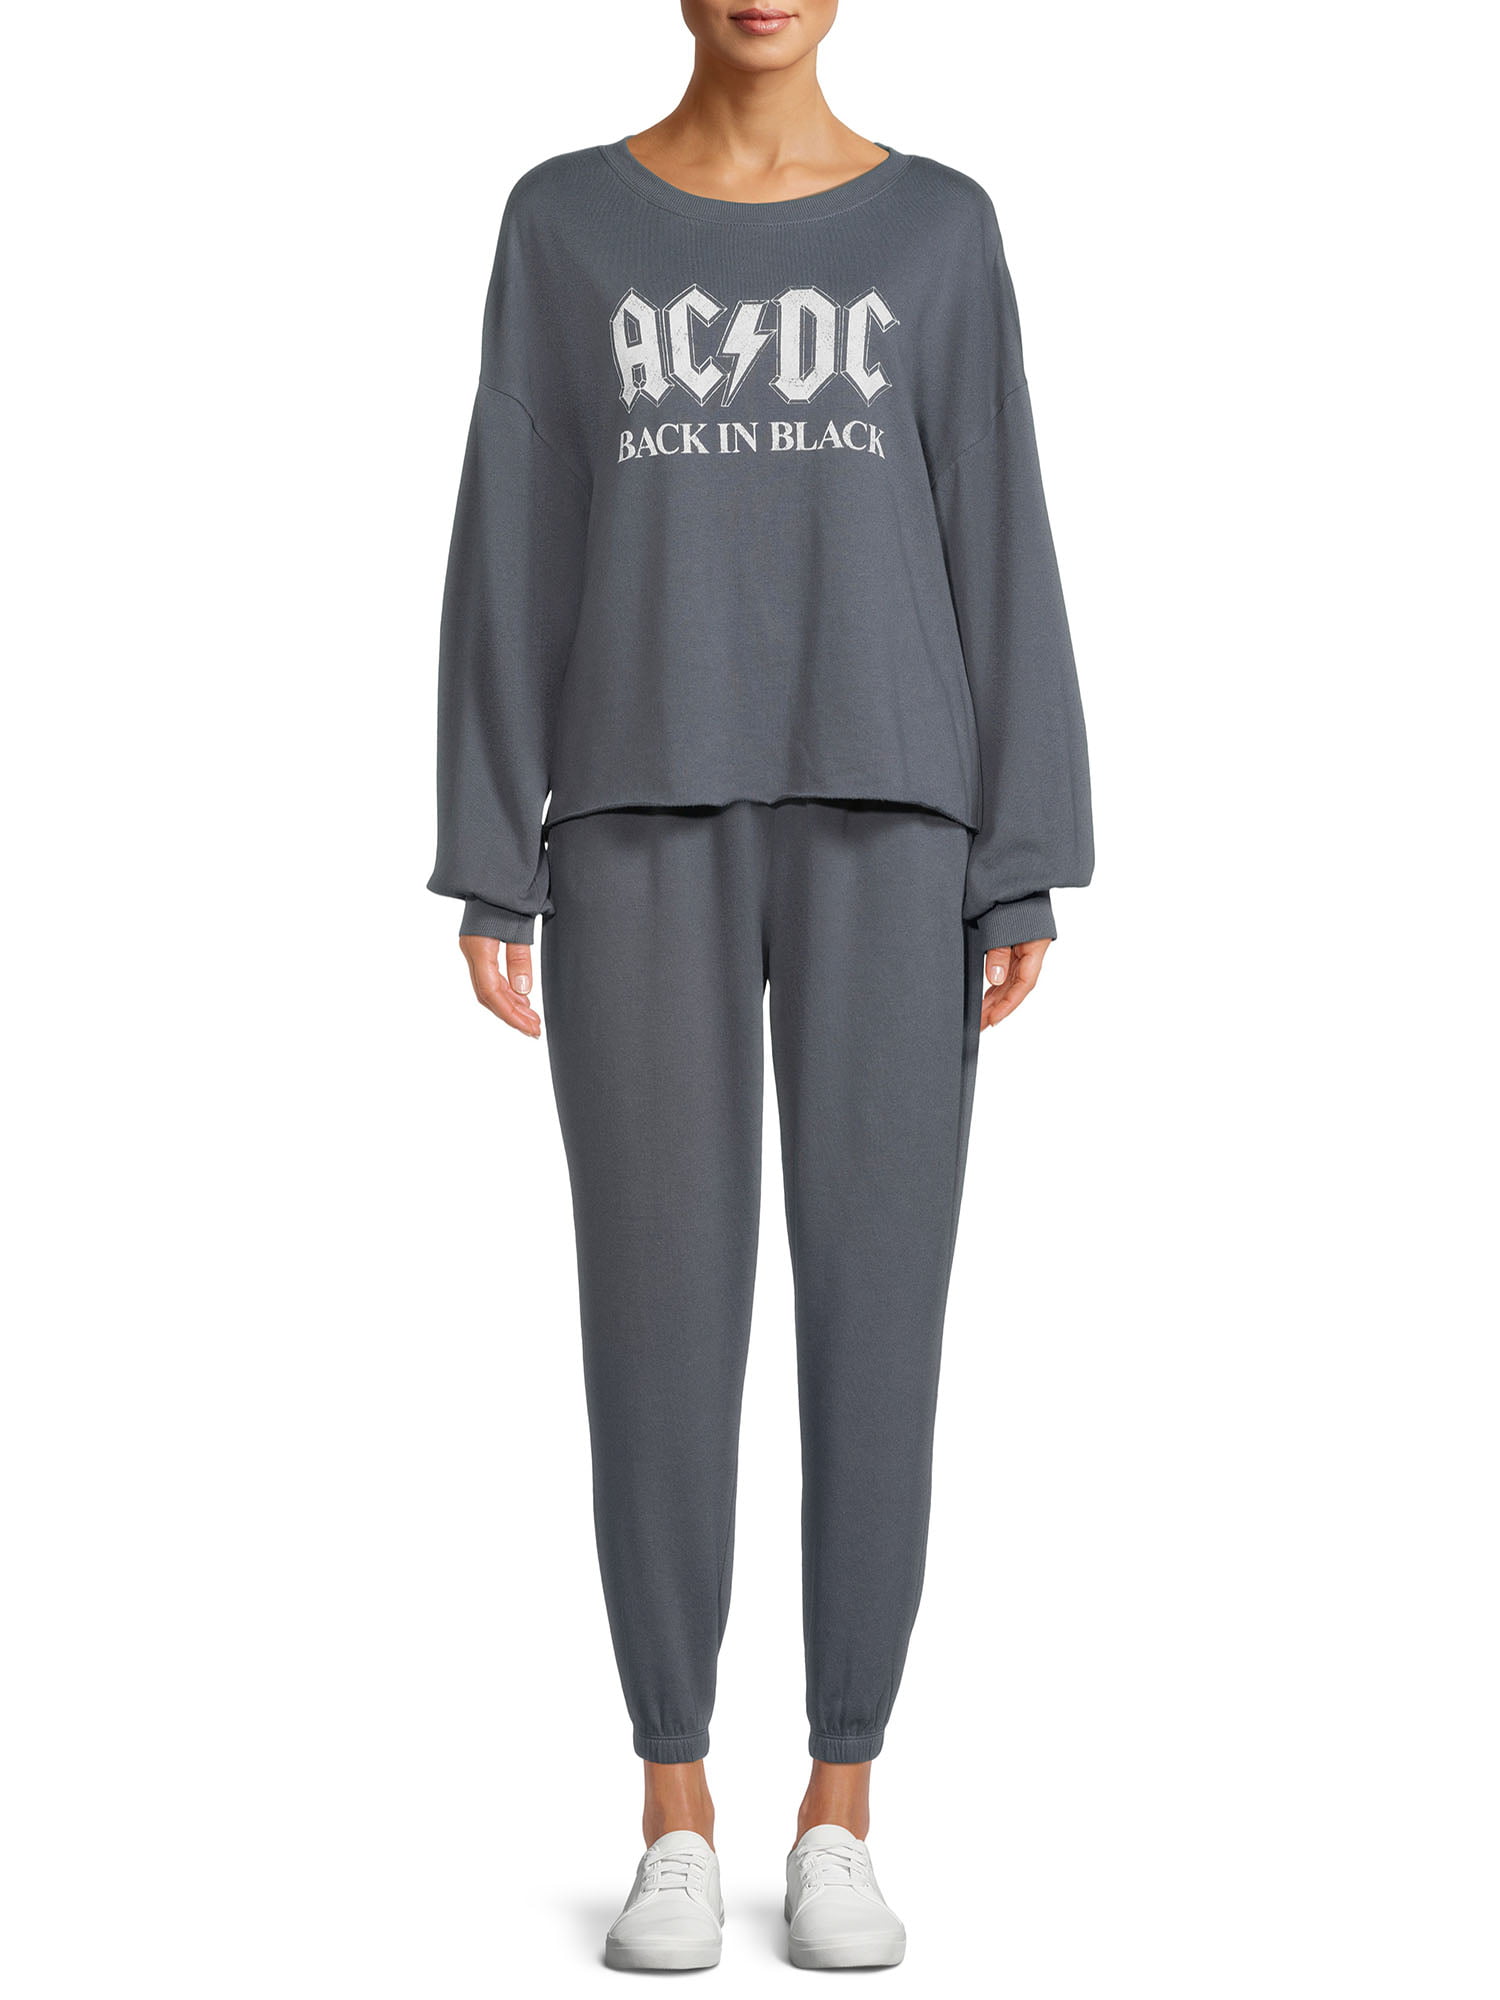 2-Piece Gray by Grayson Social Junior AC/DC Graphic Pullover & Joggers Set (Turbulance, Sizes XS-L) $6.98 + Free S&H w/ Walmart+ or $35+